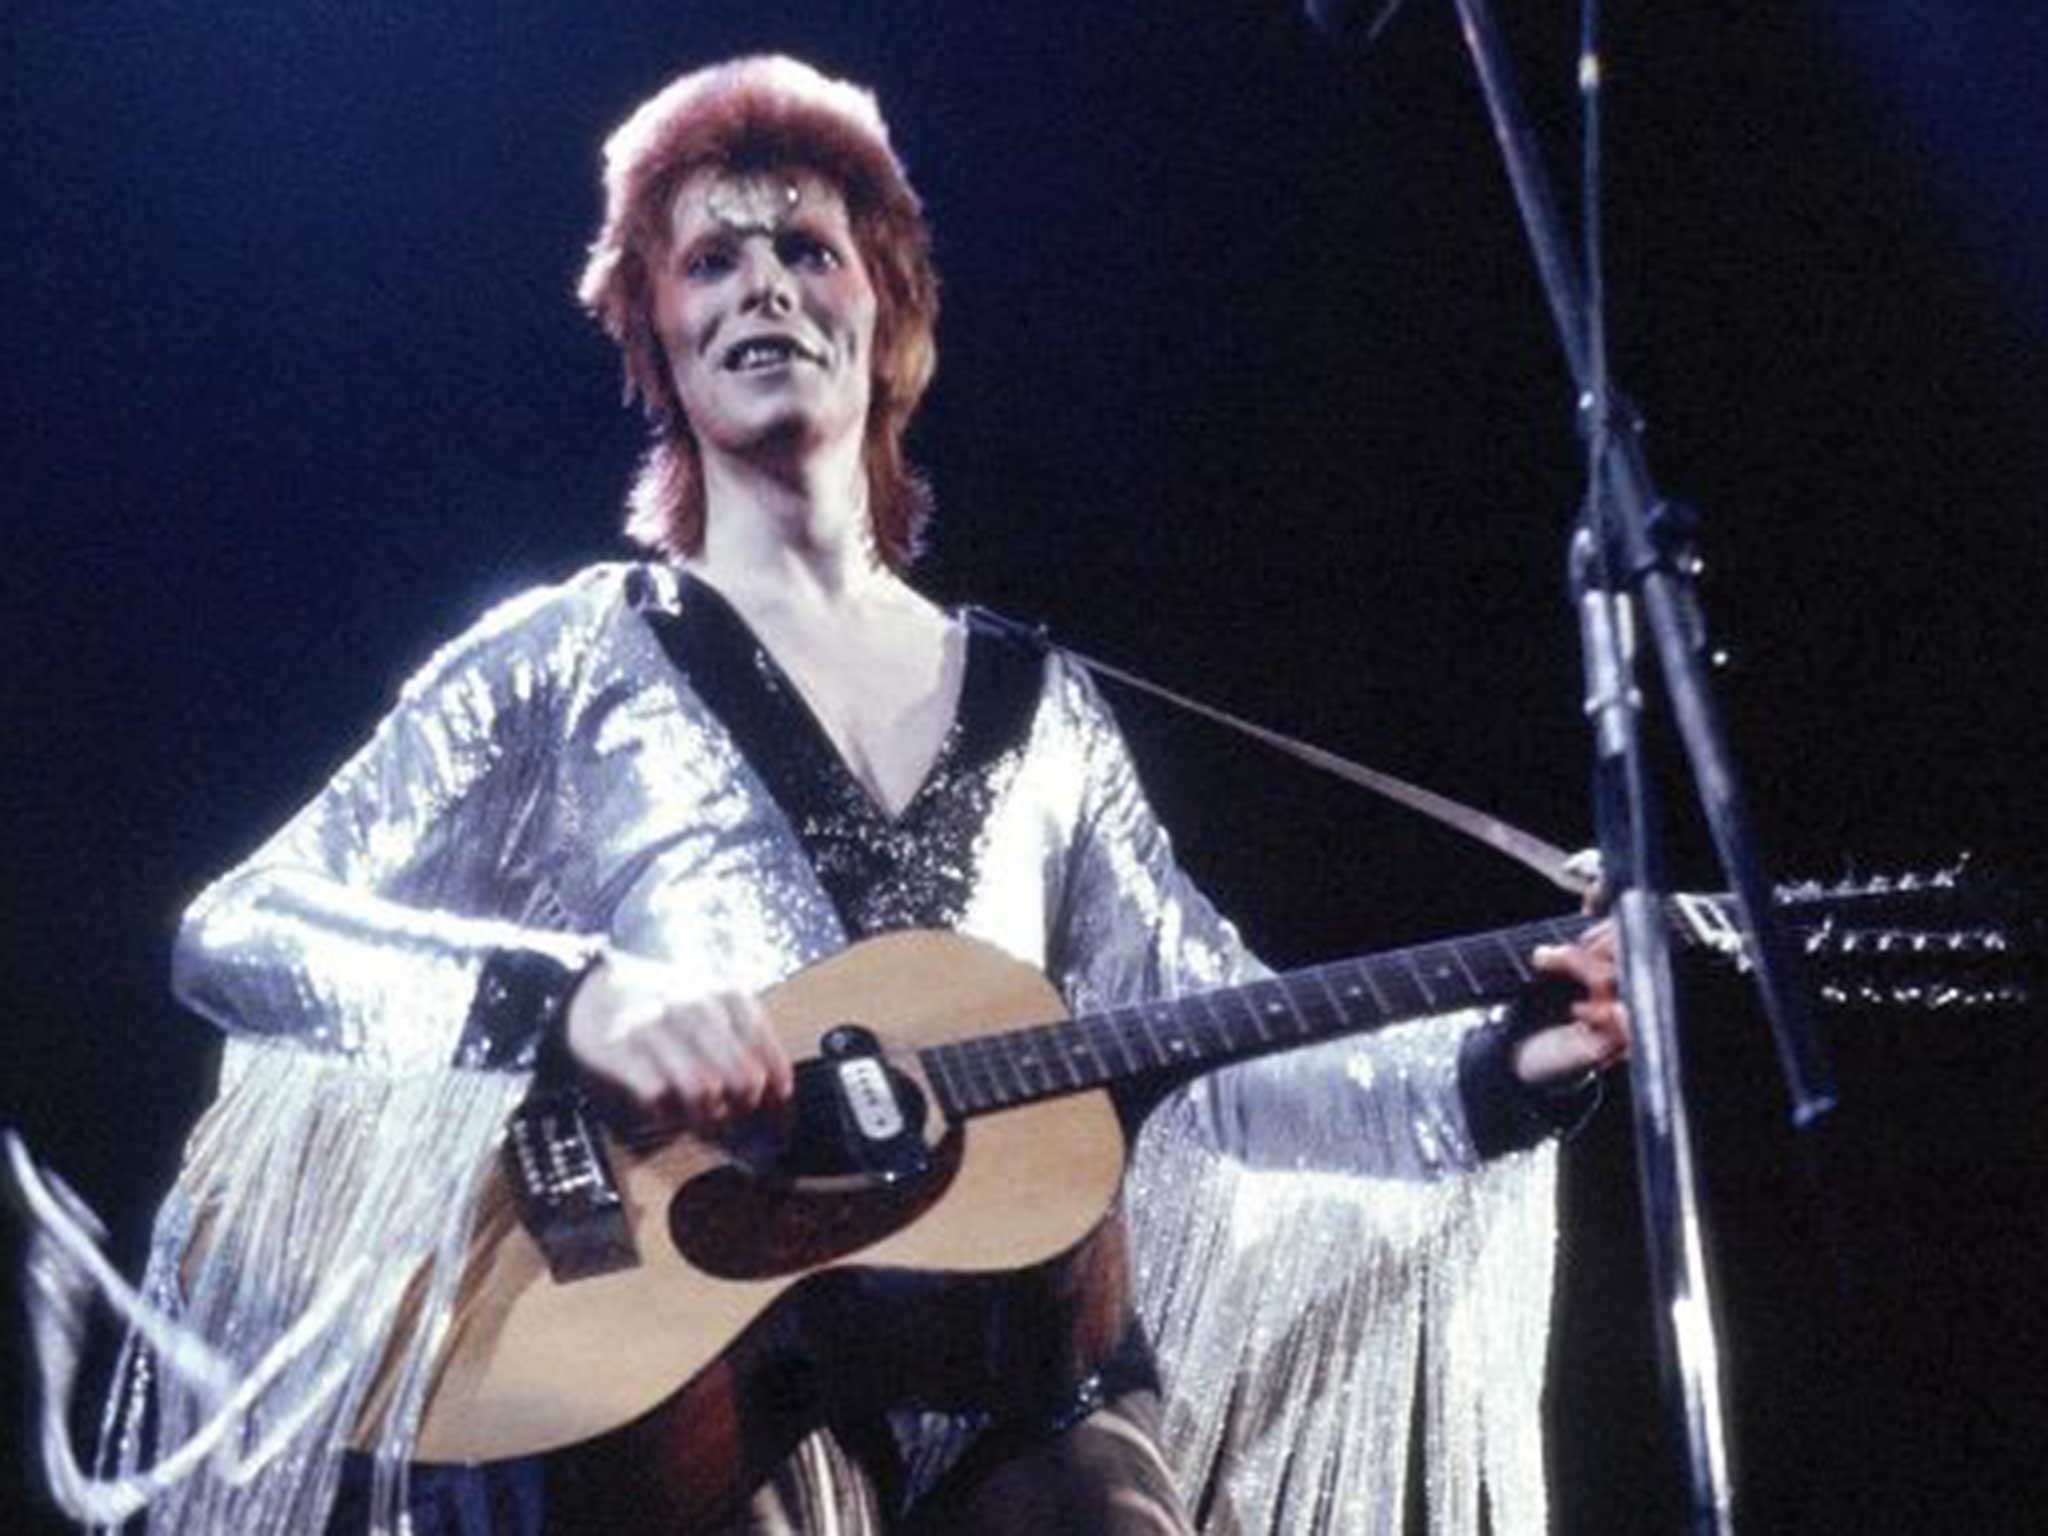 David Bowie played Earls Court during his Ziggy Stardust tour of 1973 – though the gig did not end well